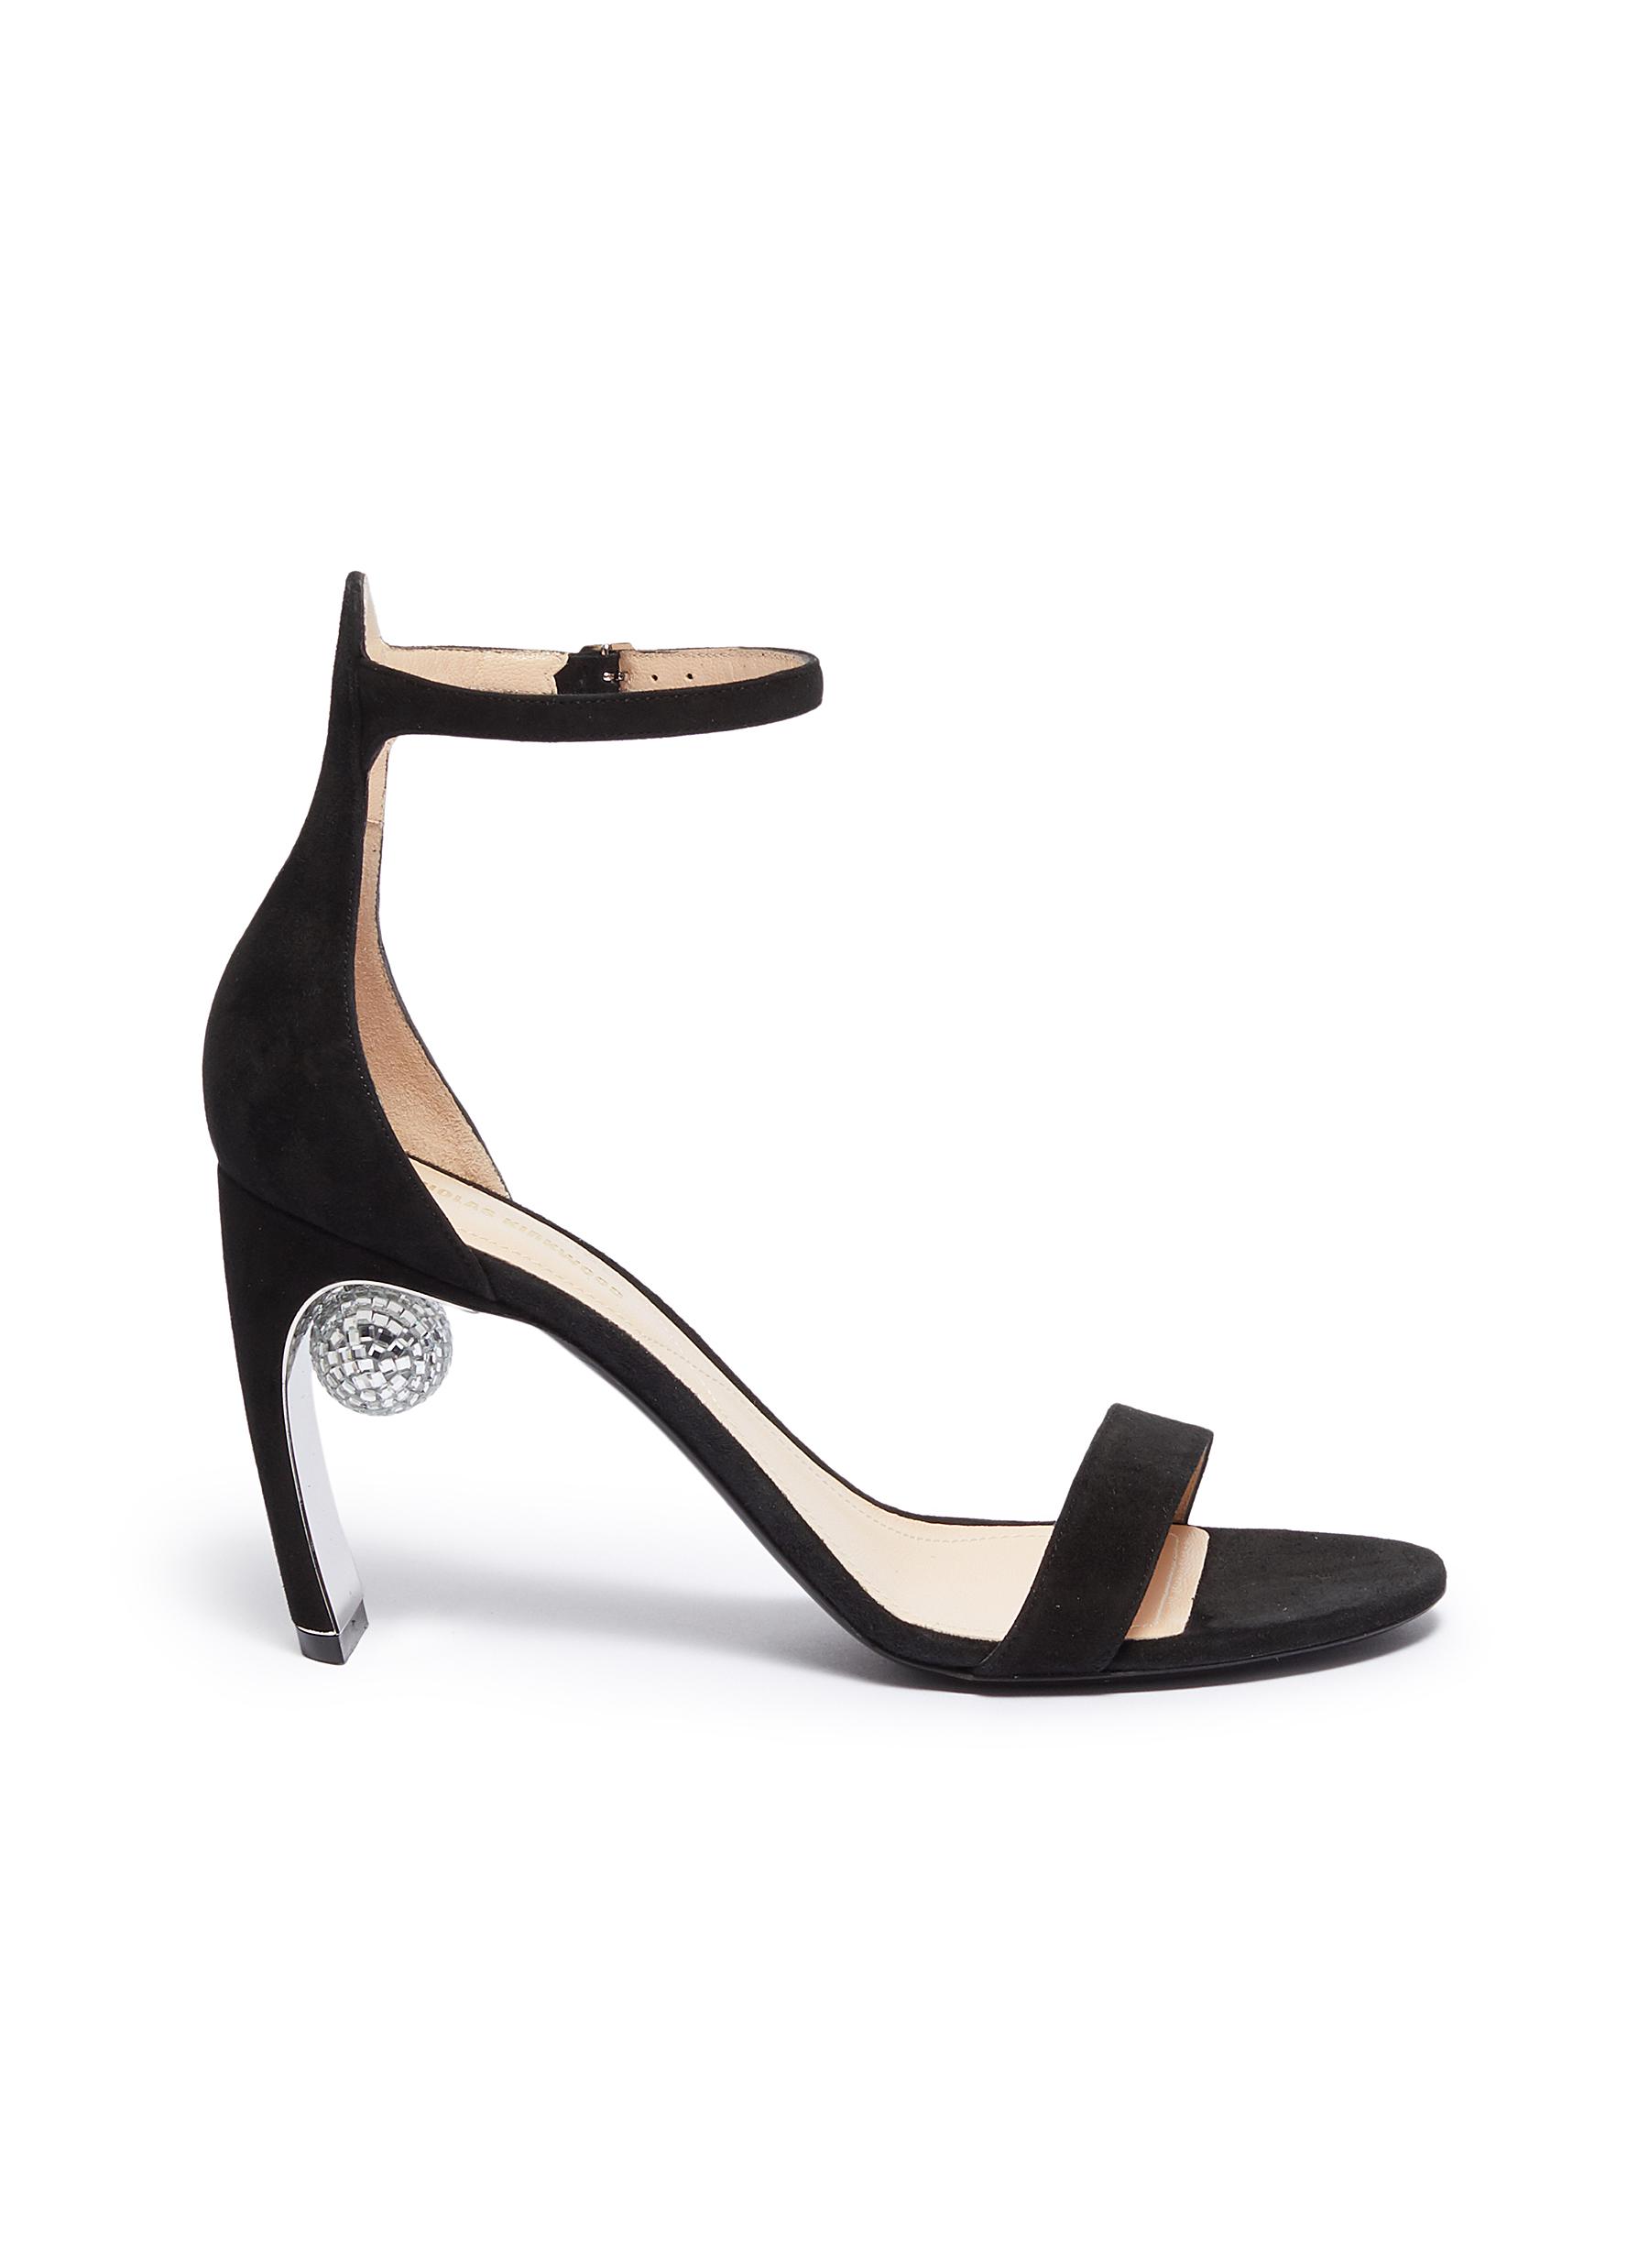 Maeva glass crystal ball ankle strap suede sandals by Nicholas Kirkwood